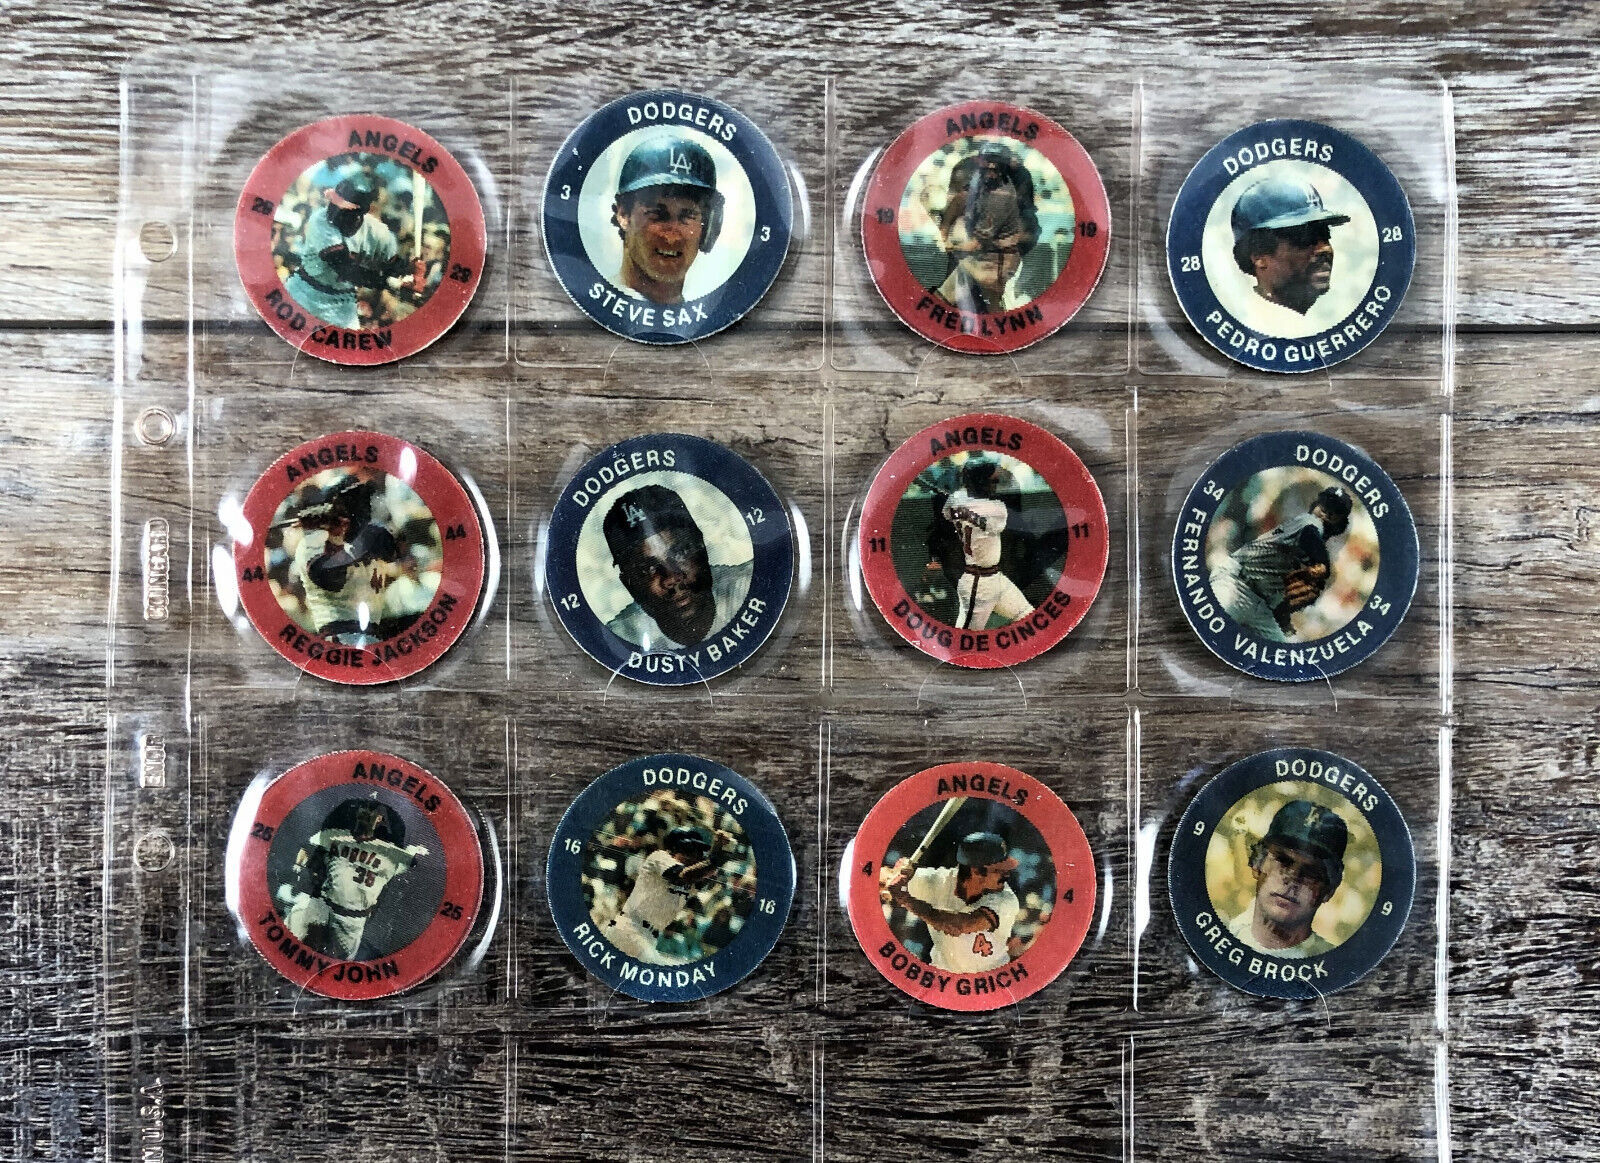 Primary image for 7-11 Slurpee Baseball Coins 1983 Complete Set of 12 Discs